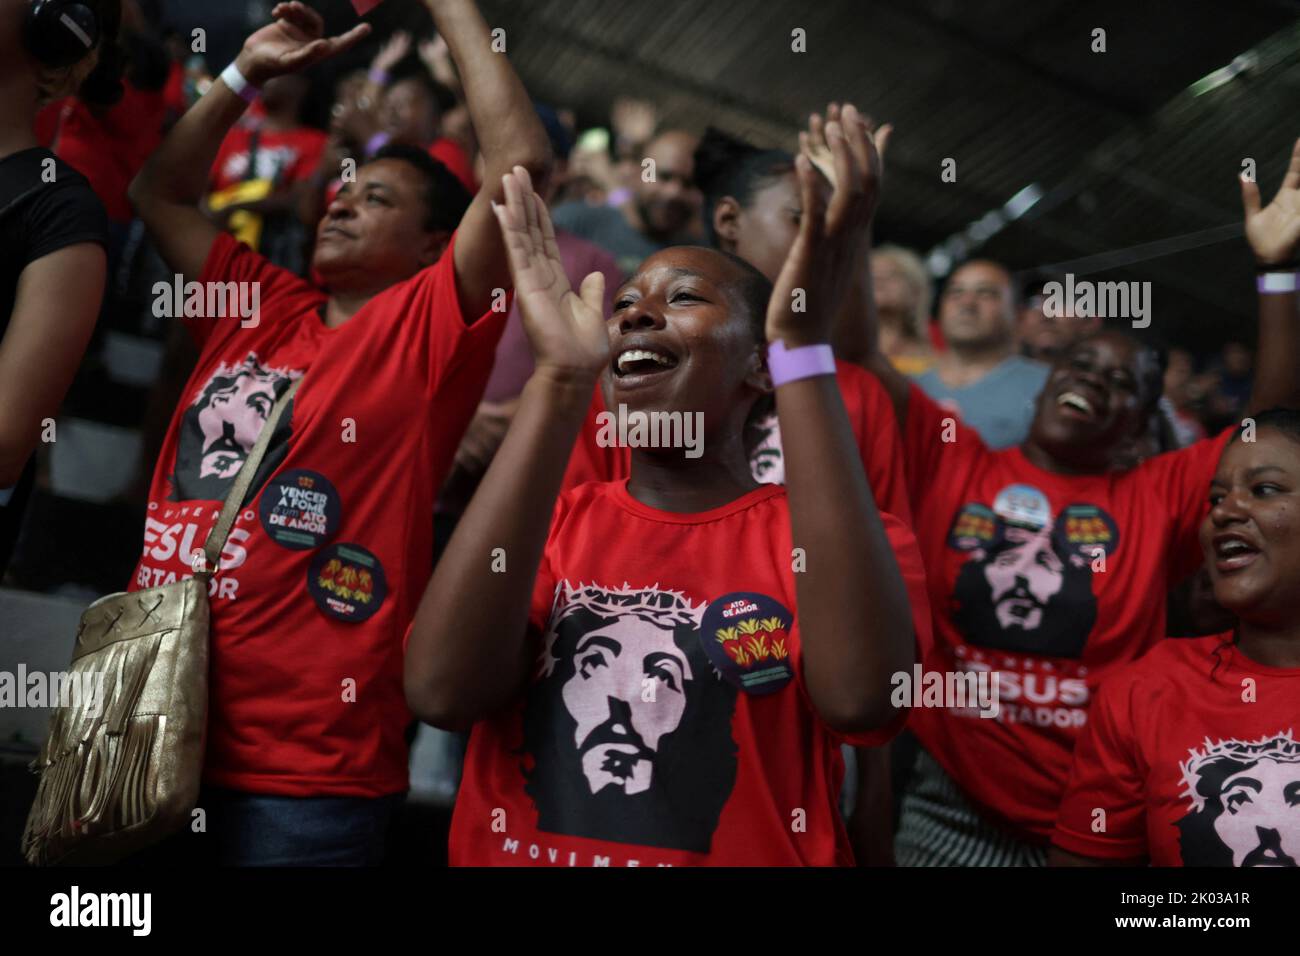 Faithfuls gather during a meeting between former President and presidential candidate Luiz Inacio Lula da Silva with evangelical leaders in Sao Goncalo in Rio de Janeiro state, Brazil September 9, 2022. REUTERS/Pilar Olivares Stock Photo